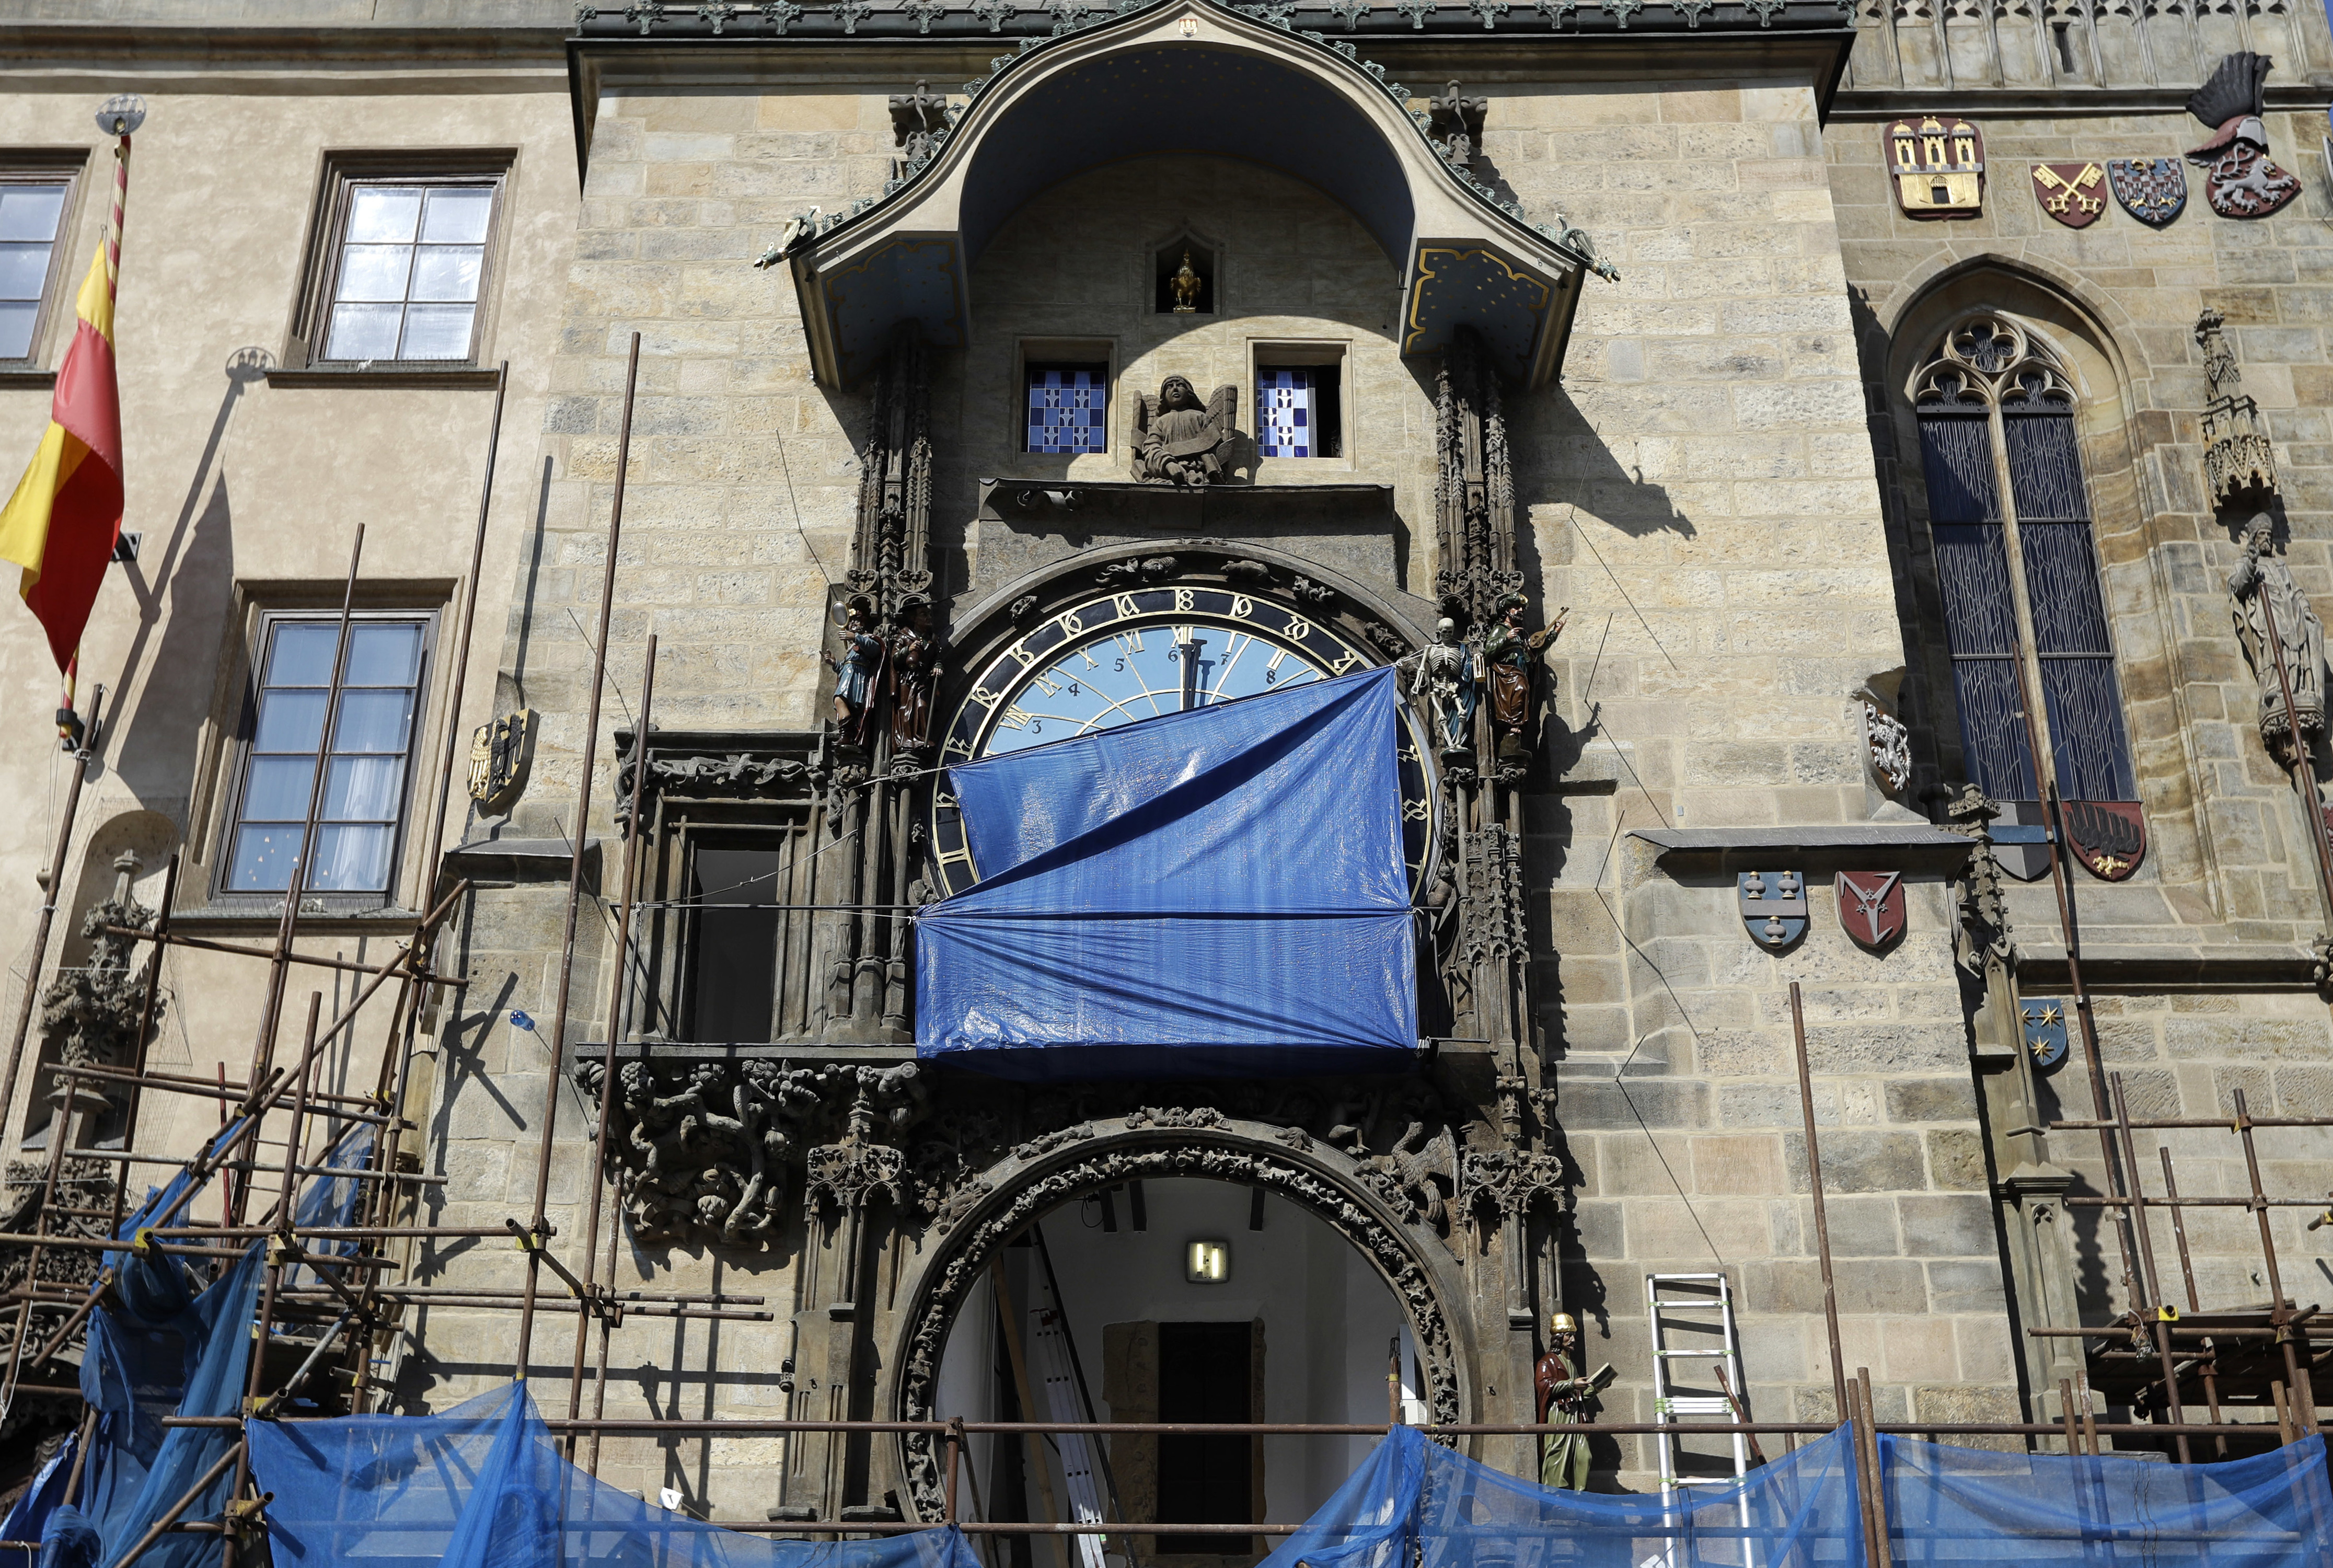 Scaffolding surrounds the famed Prague's medieval astronomical clock